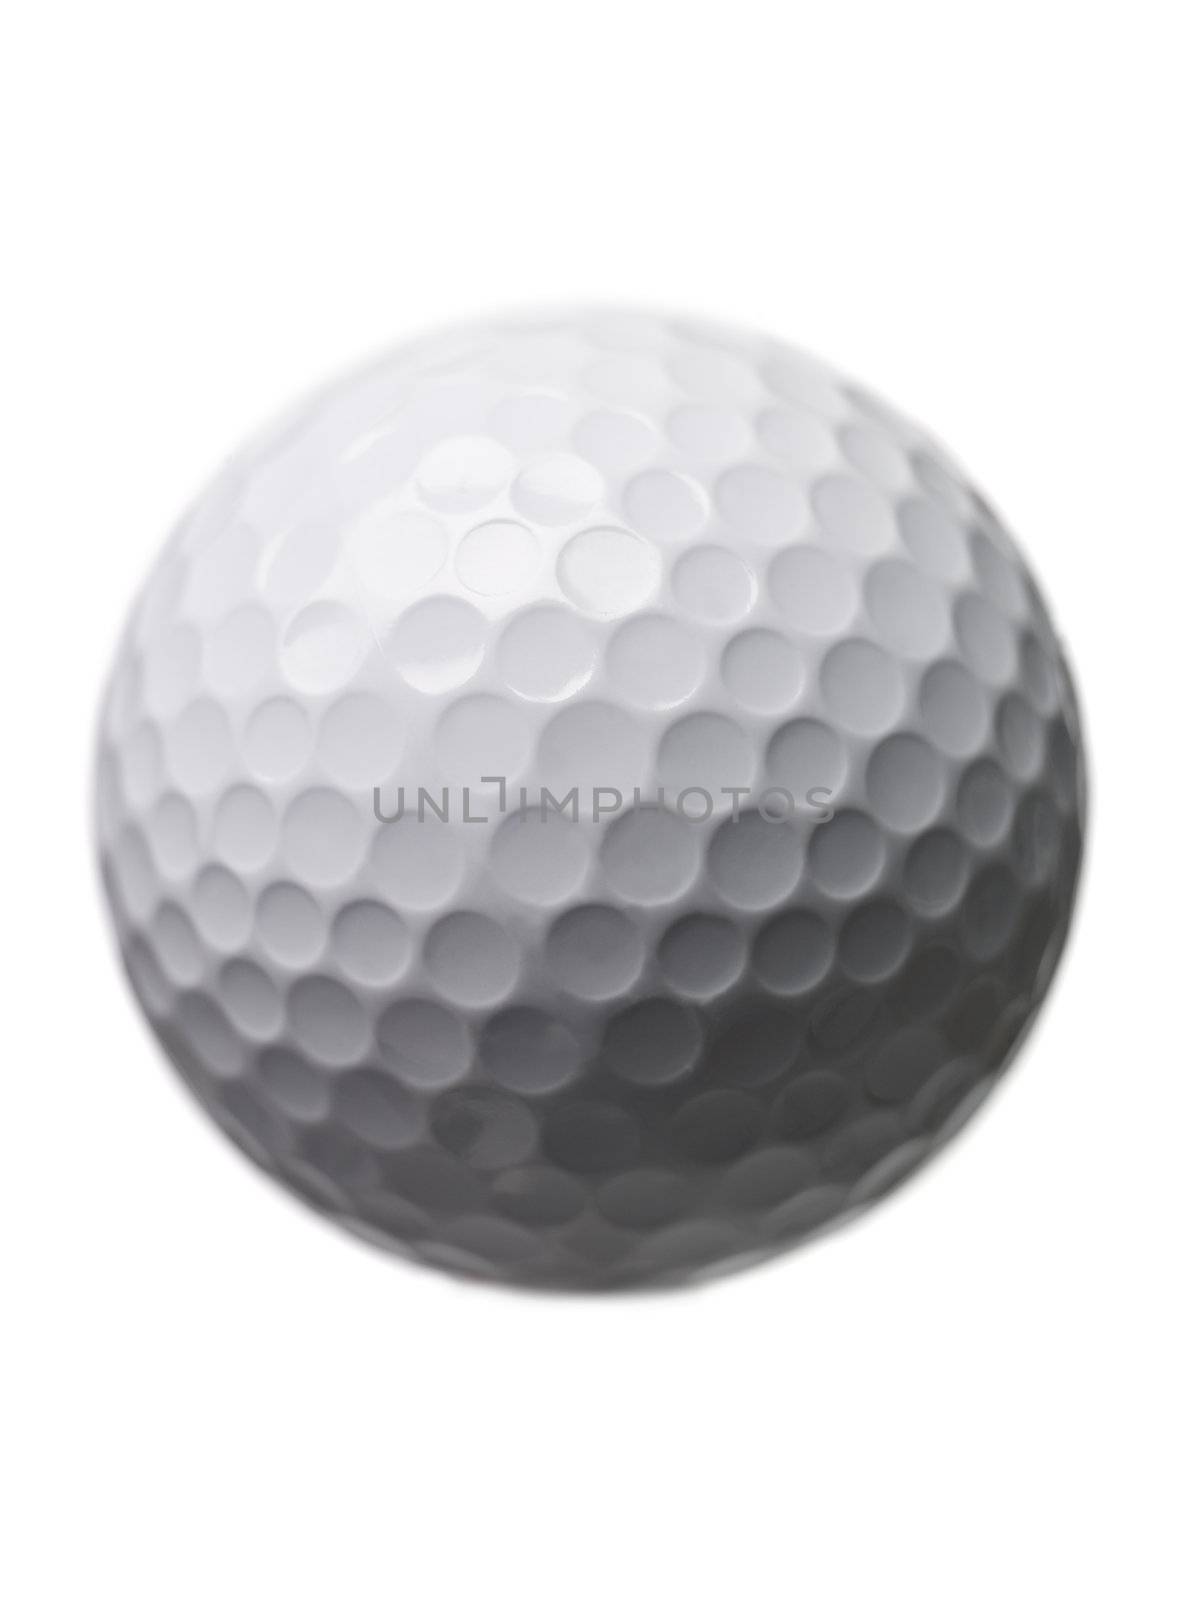 Golf ball isloated on white background